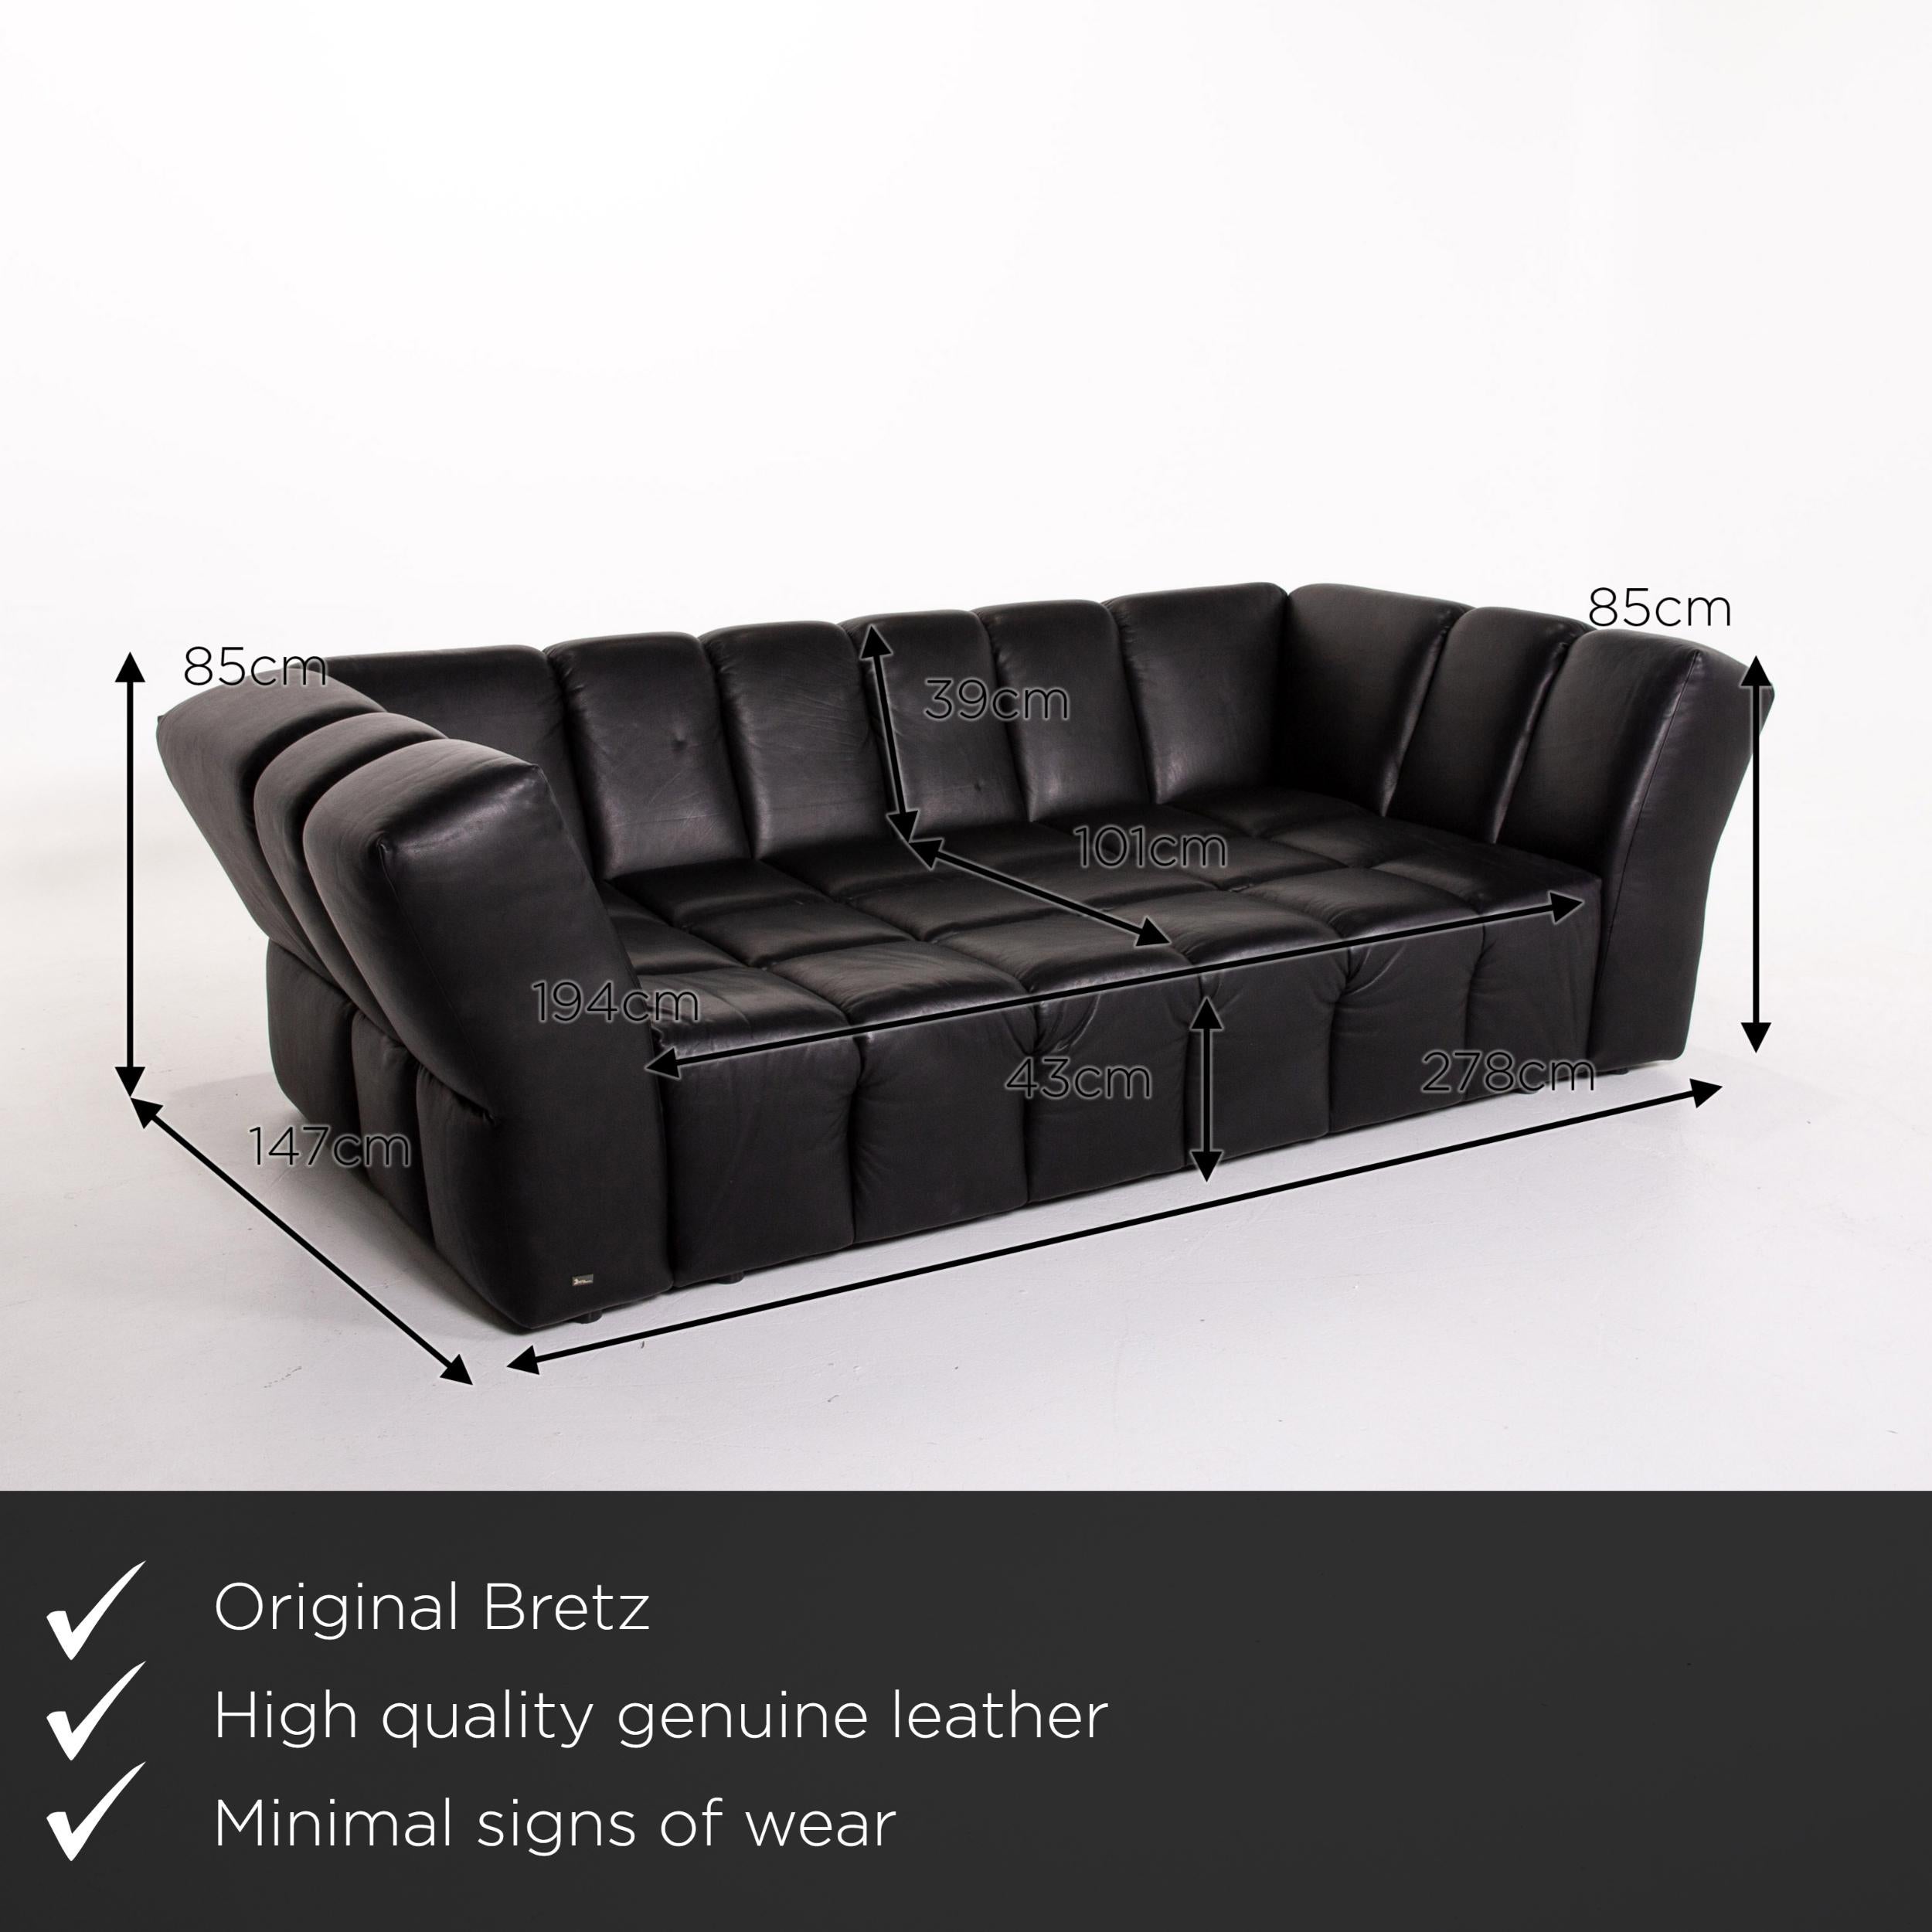 We present to you a Bretz Chocolat leather sofa black four-seat couch.

 

 Product measurements in centimeters:
 

Depth 147
Width 278
Height 85
Seat height 43
Rest height 85
Seat depth 101
Seat width 194
Back height 39.
  